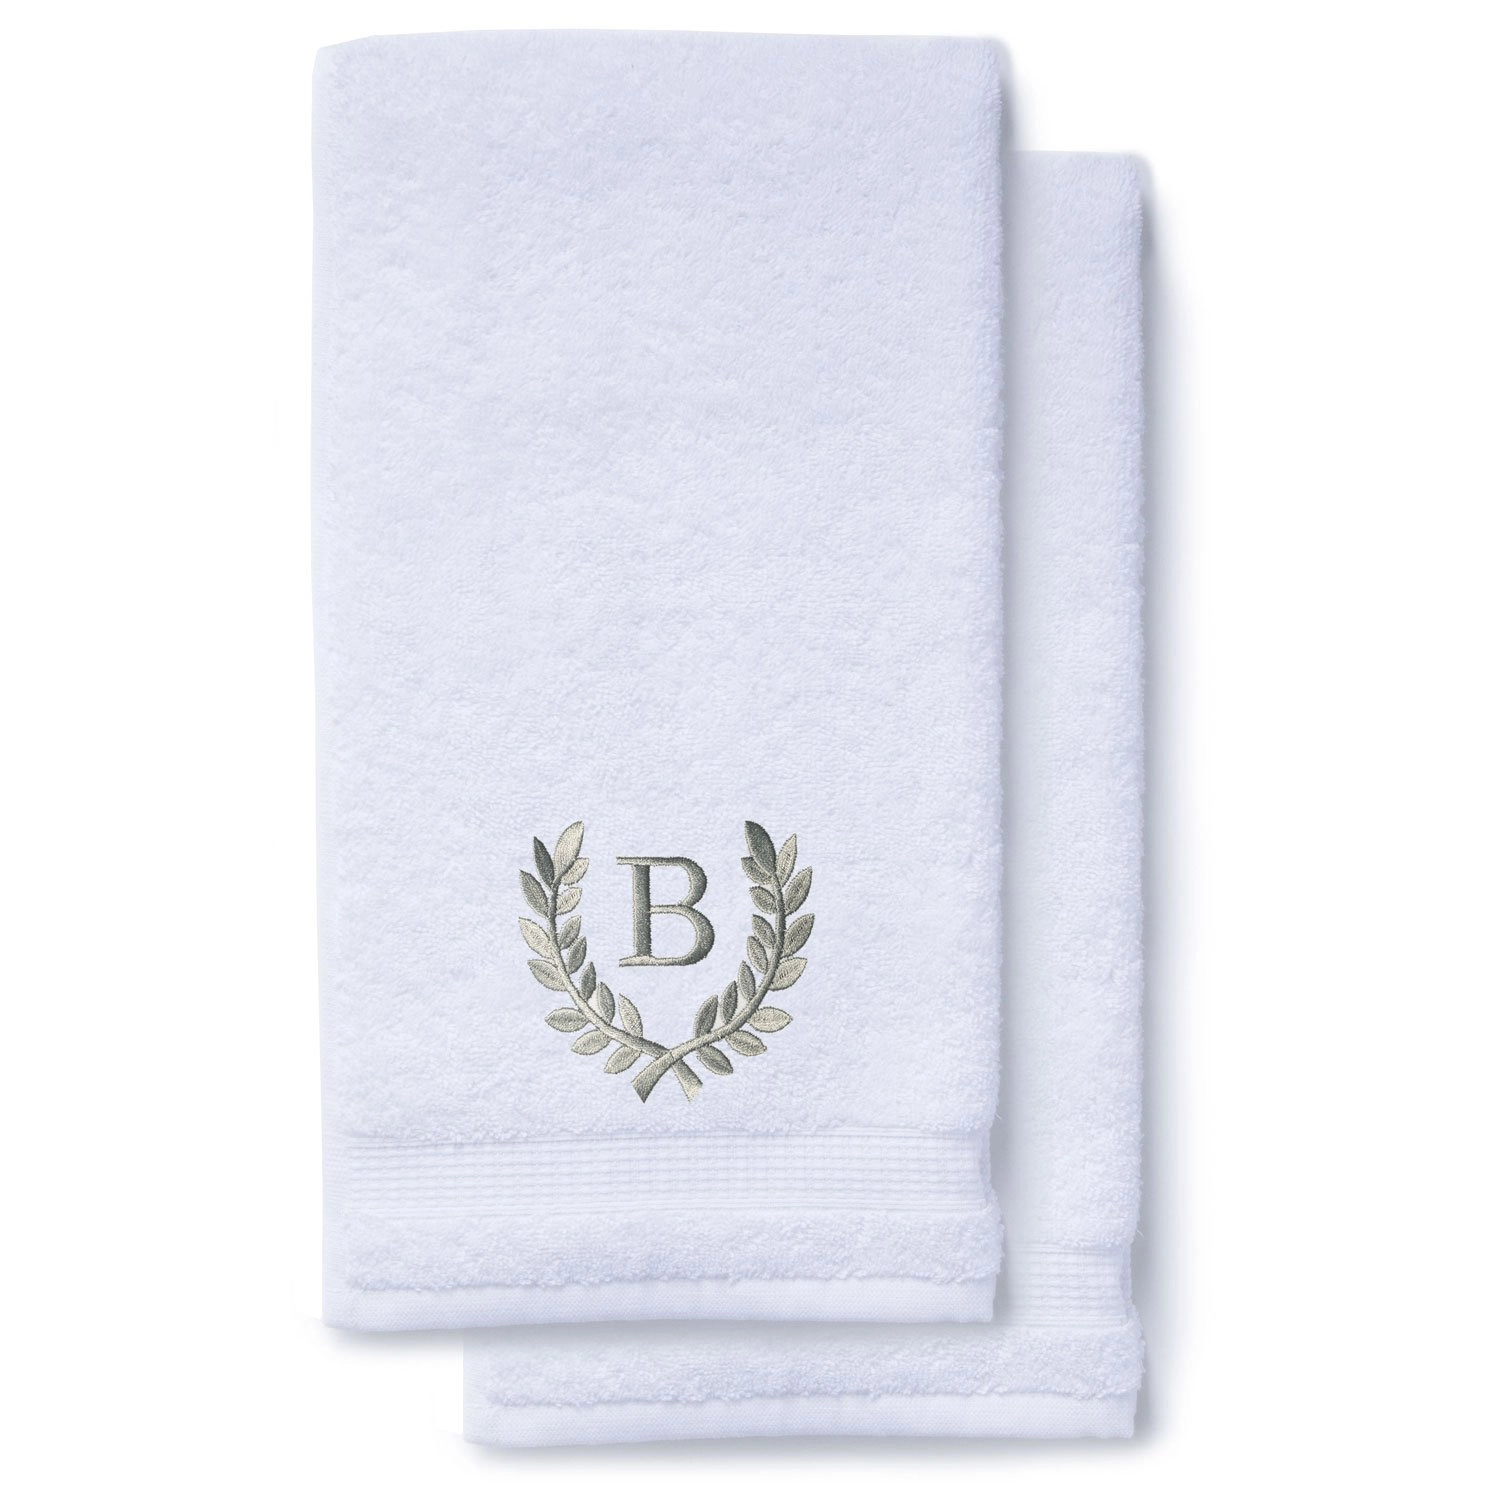 http://robemart.com/images/thumbnails/detailed/7/B-Gray-stacked-Monogrammed-Hand-Towels.webp